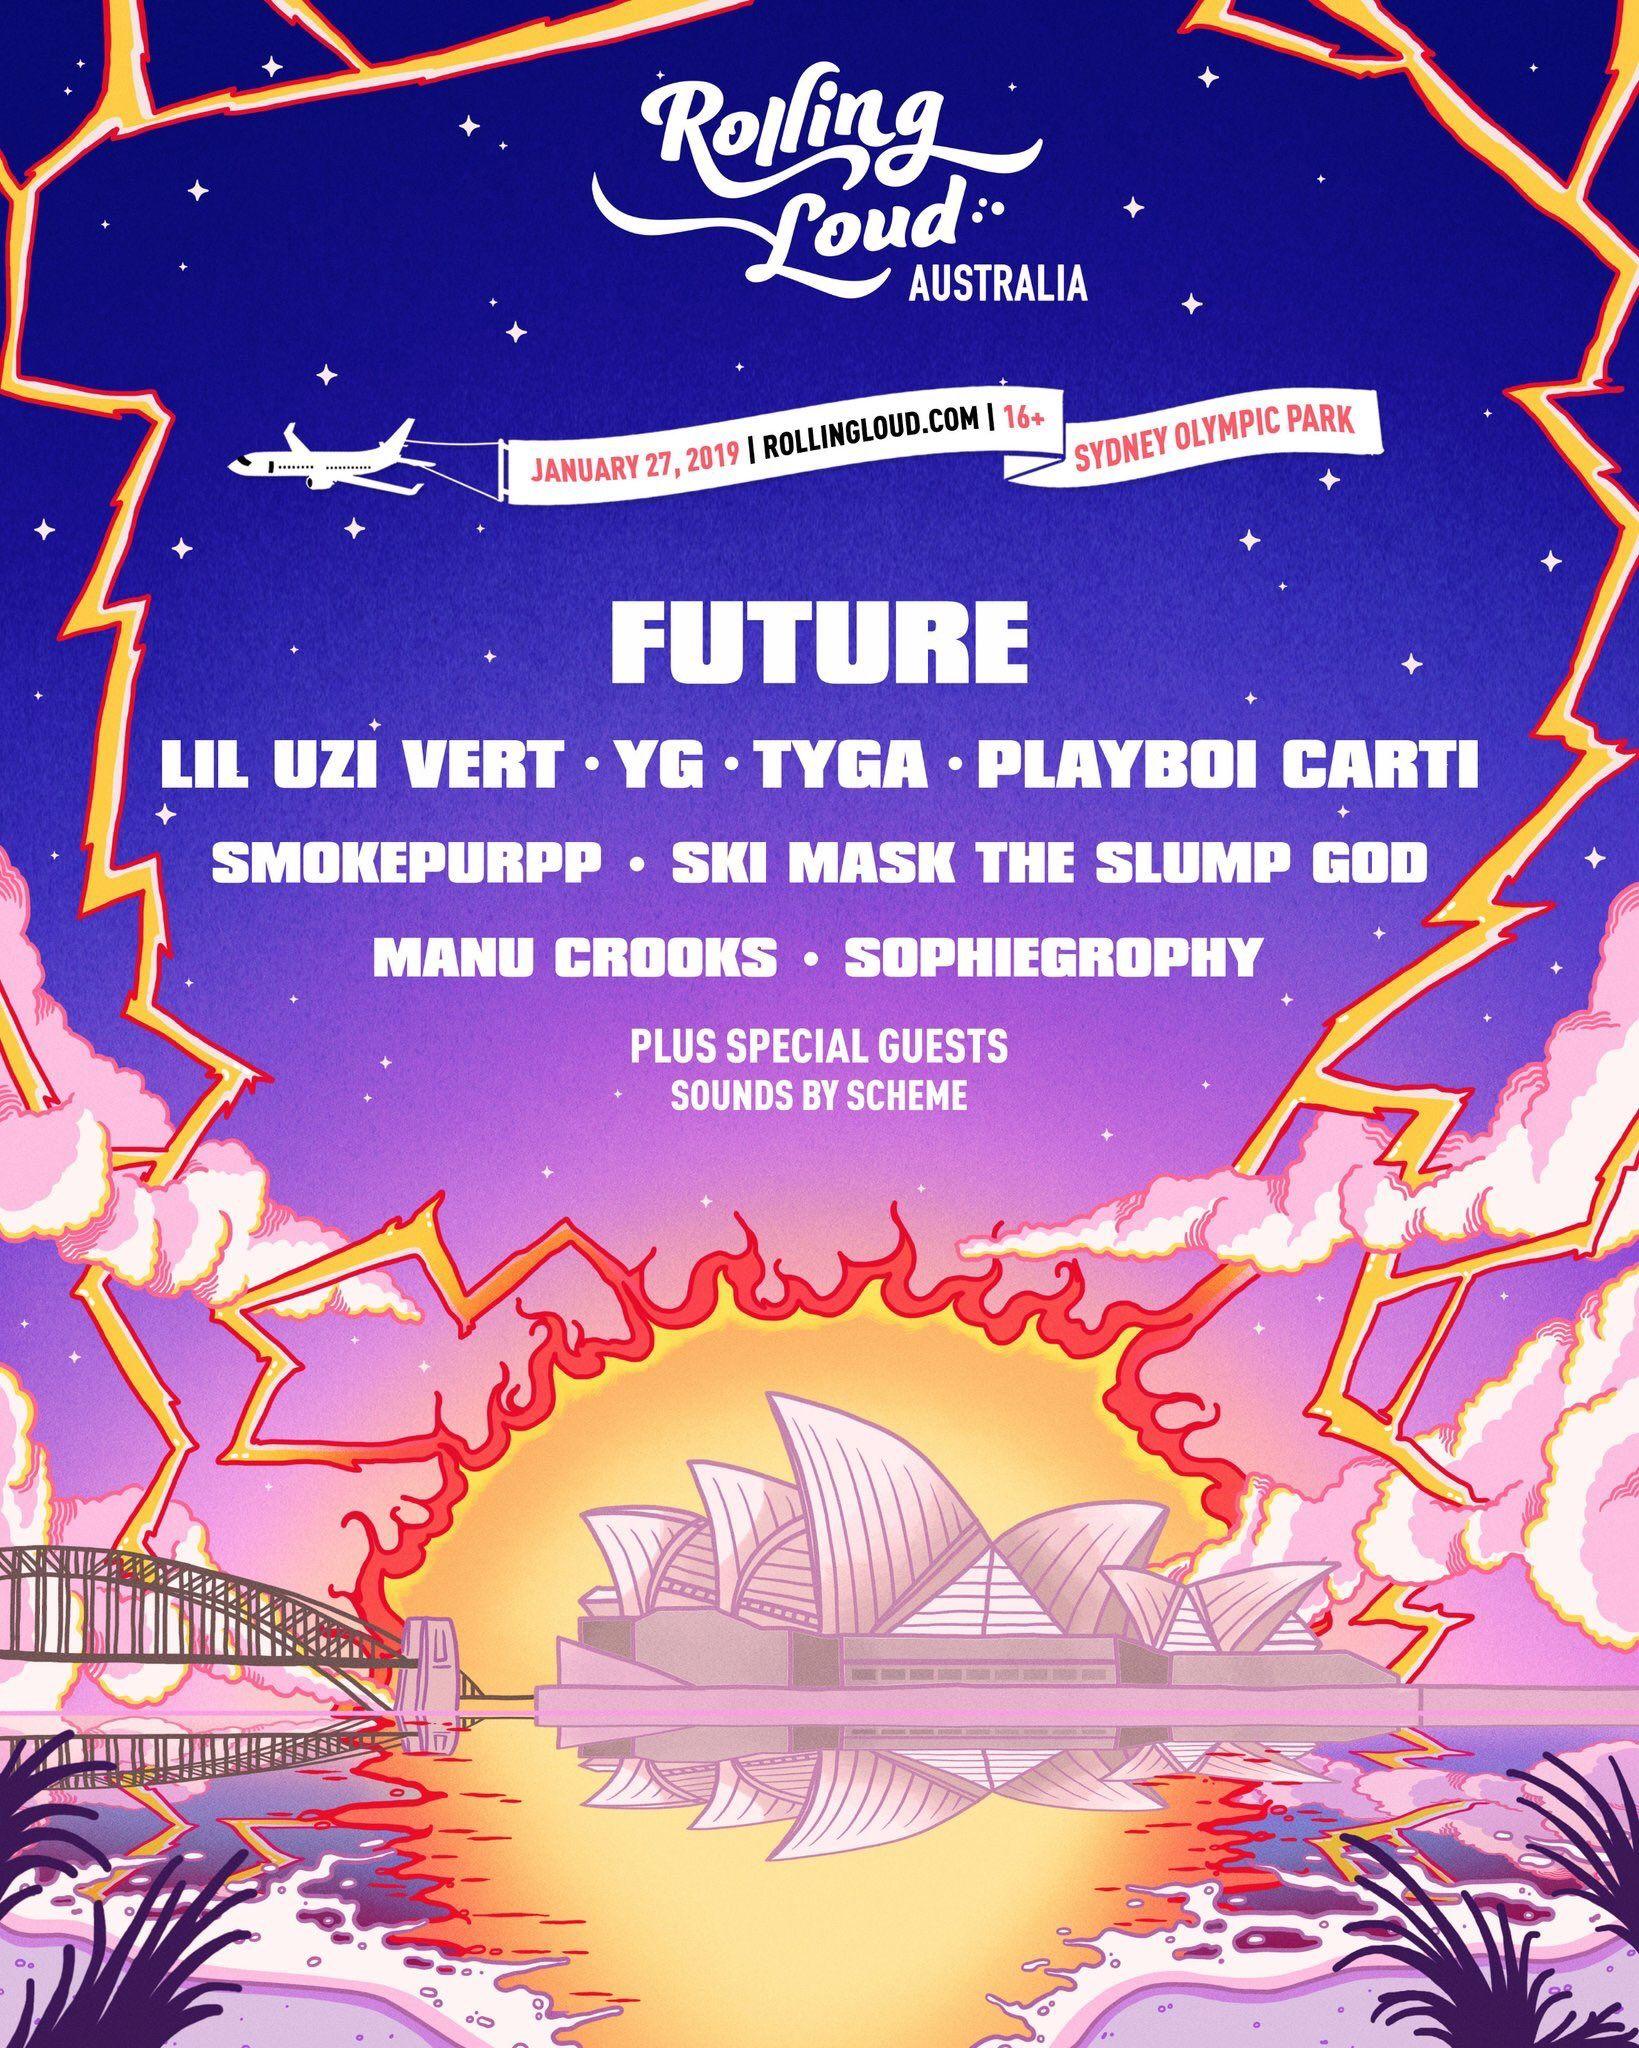 JUST ANNOUNCED Uzi is still performing at Rolling Loud Australia